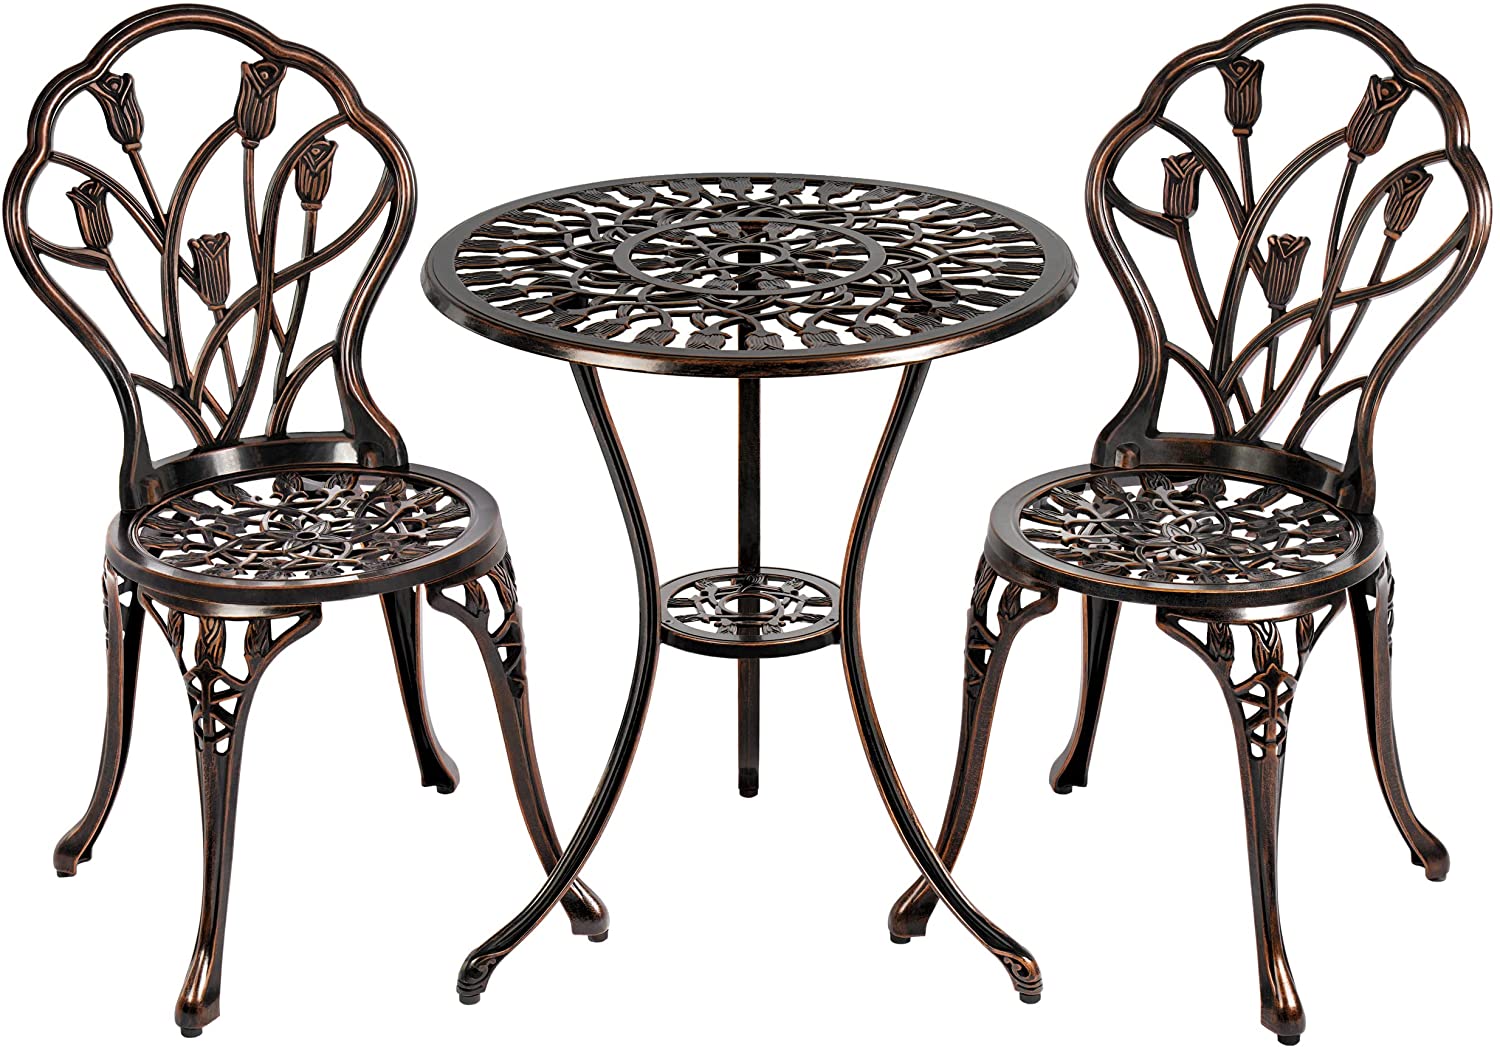 Bistro Dining Table Set Cast Aluminum Outdoor Furniture Weatherproof Patio Tables and Chairs